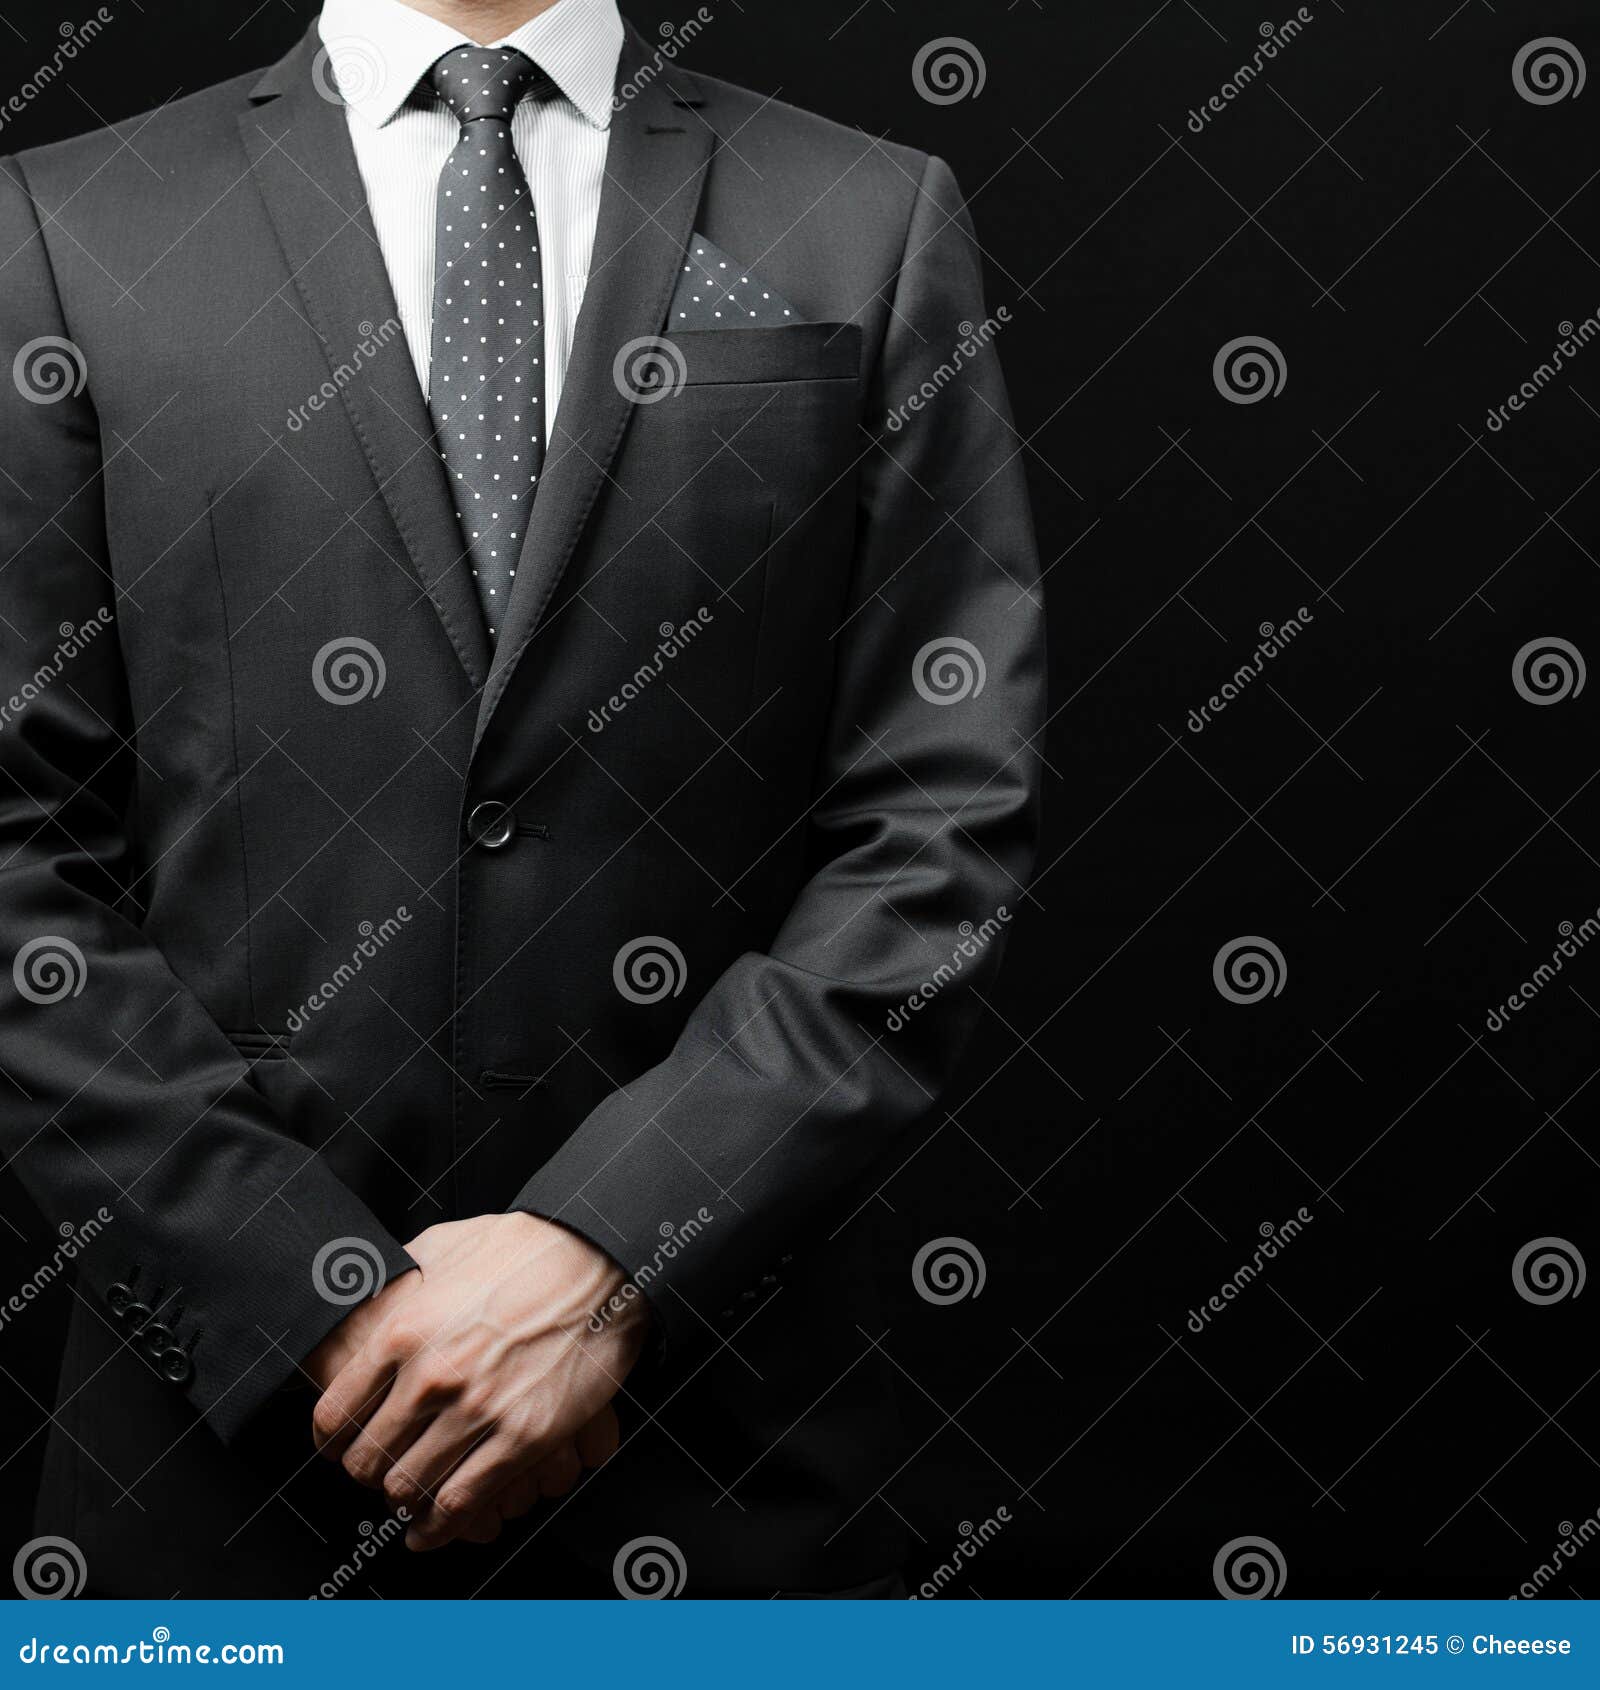 Man in Suit on a Black Background Stock Image - Image of corporate ...